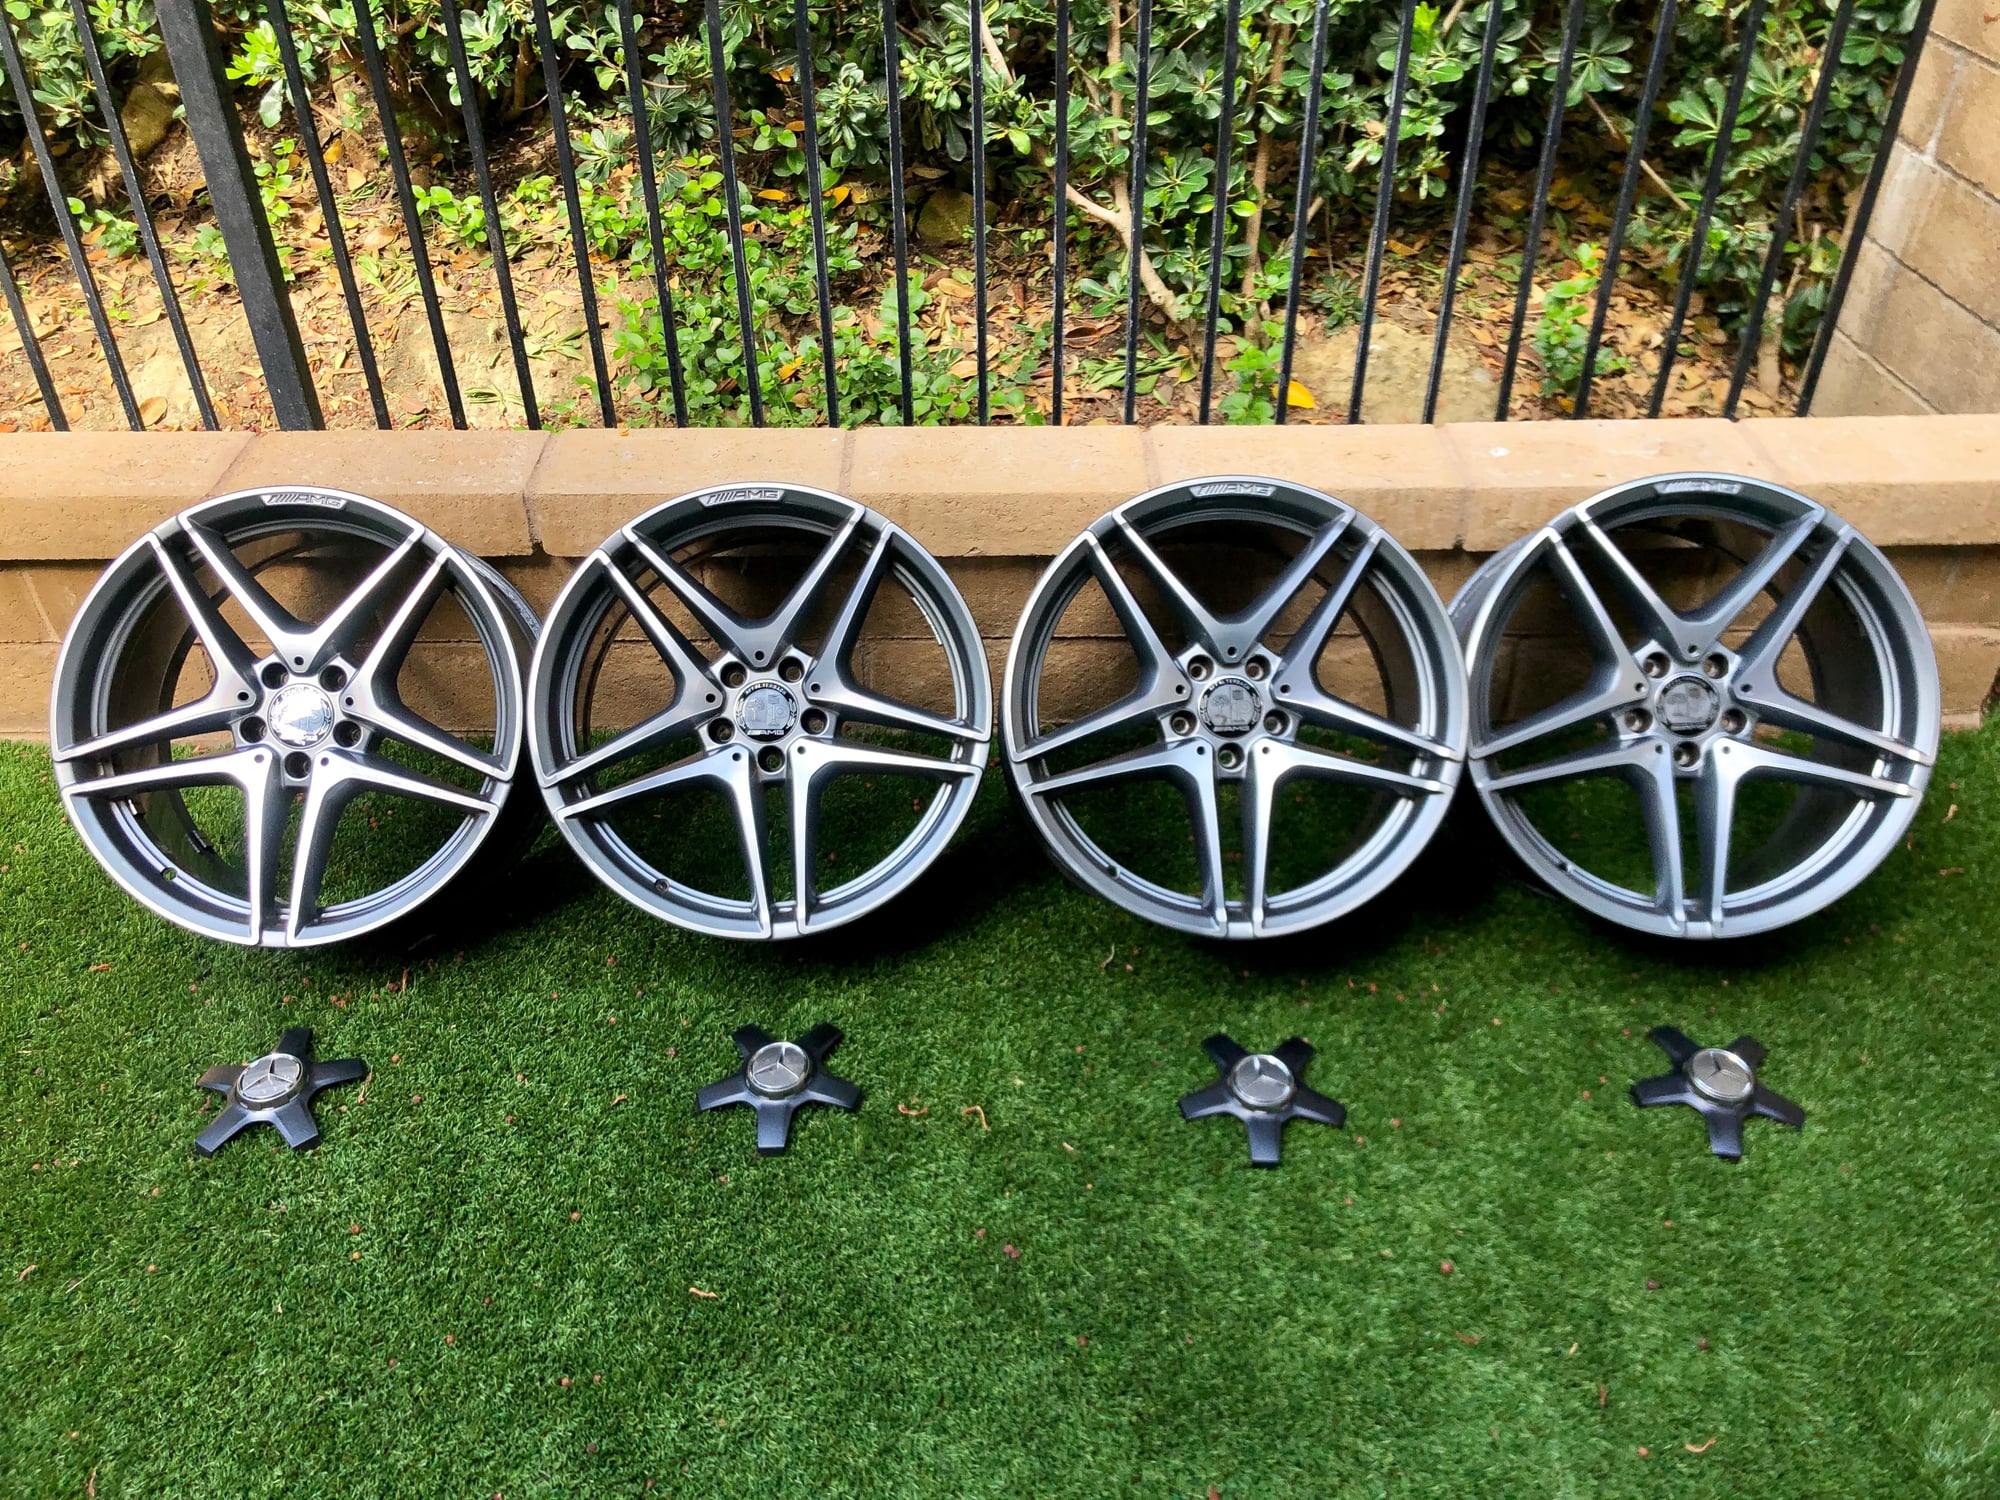 Wheels and Tires/Axles - 19" Mercedes-Benz AMG C63 Wheel *OEM* - Used - 2015 to 2019 Mercedes-Benz C63 AMG S - Irvine, CA 92603, United States